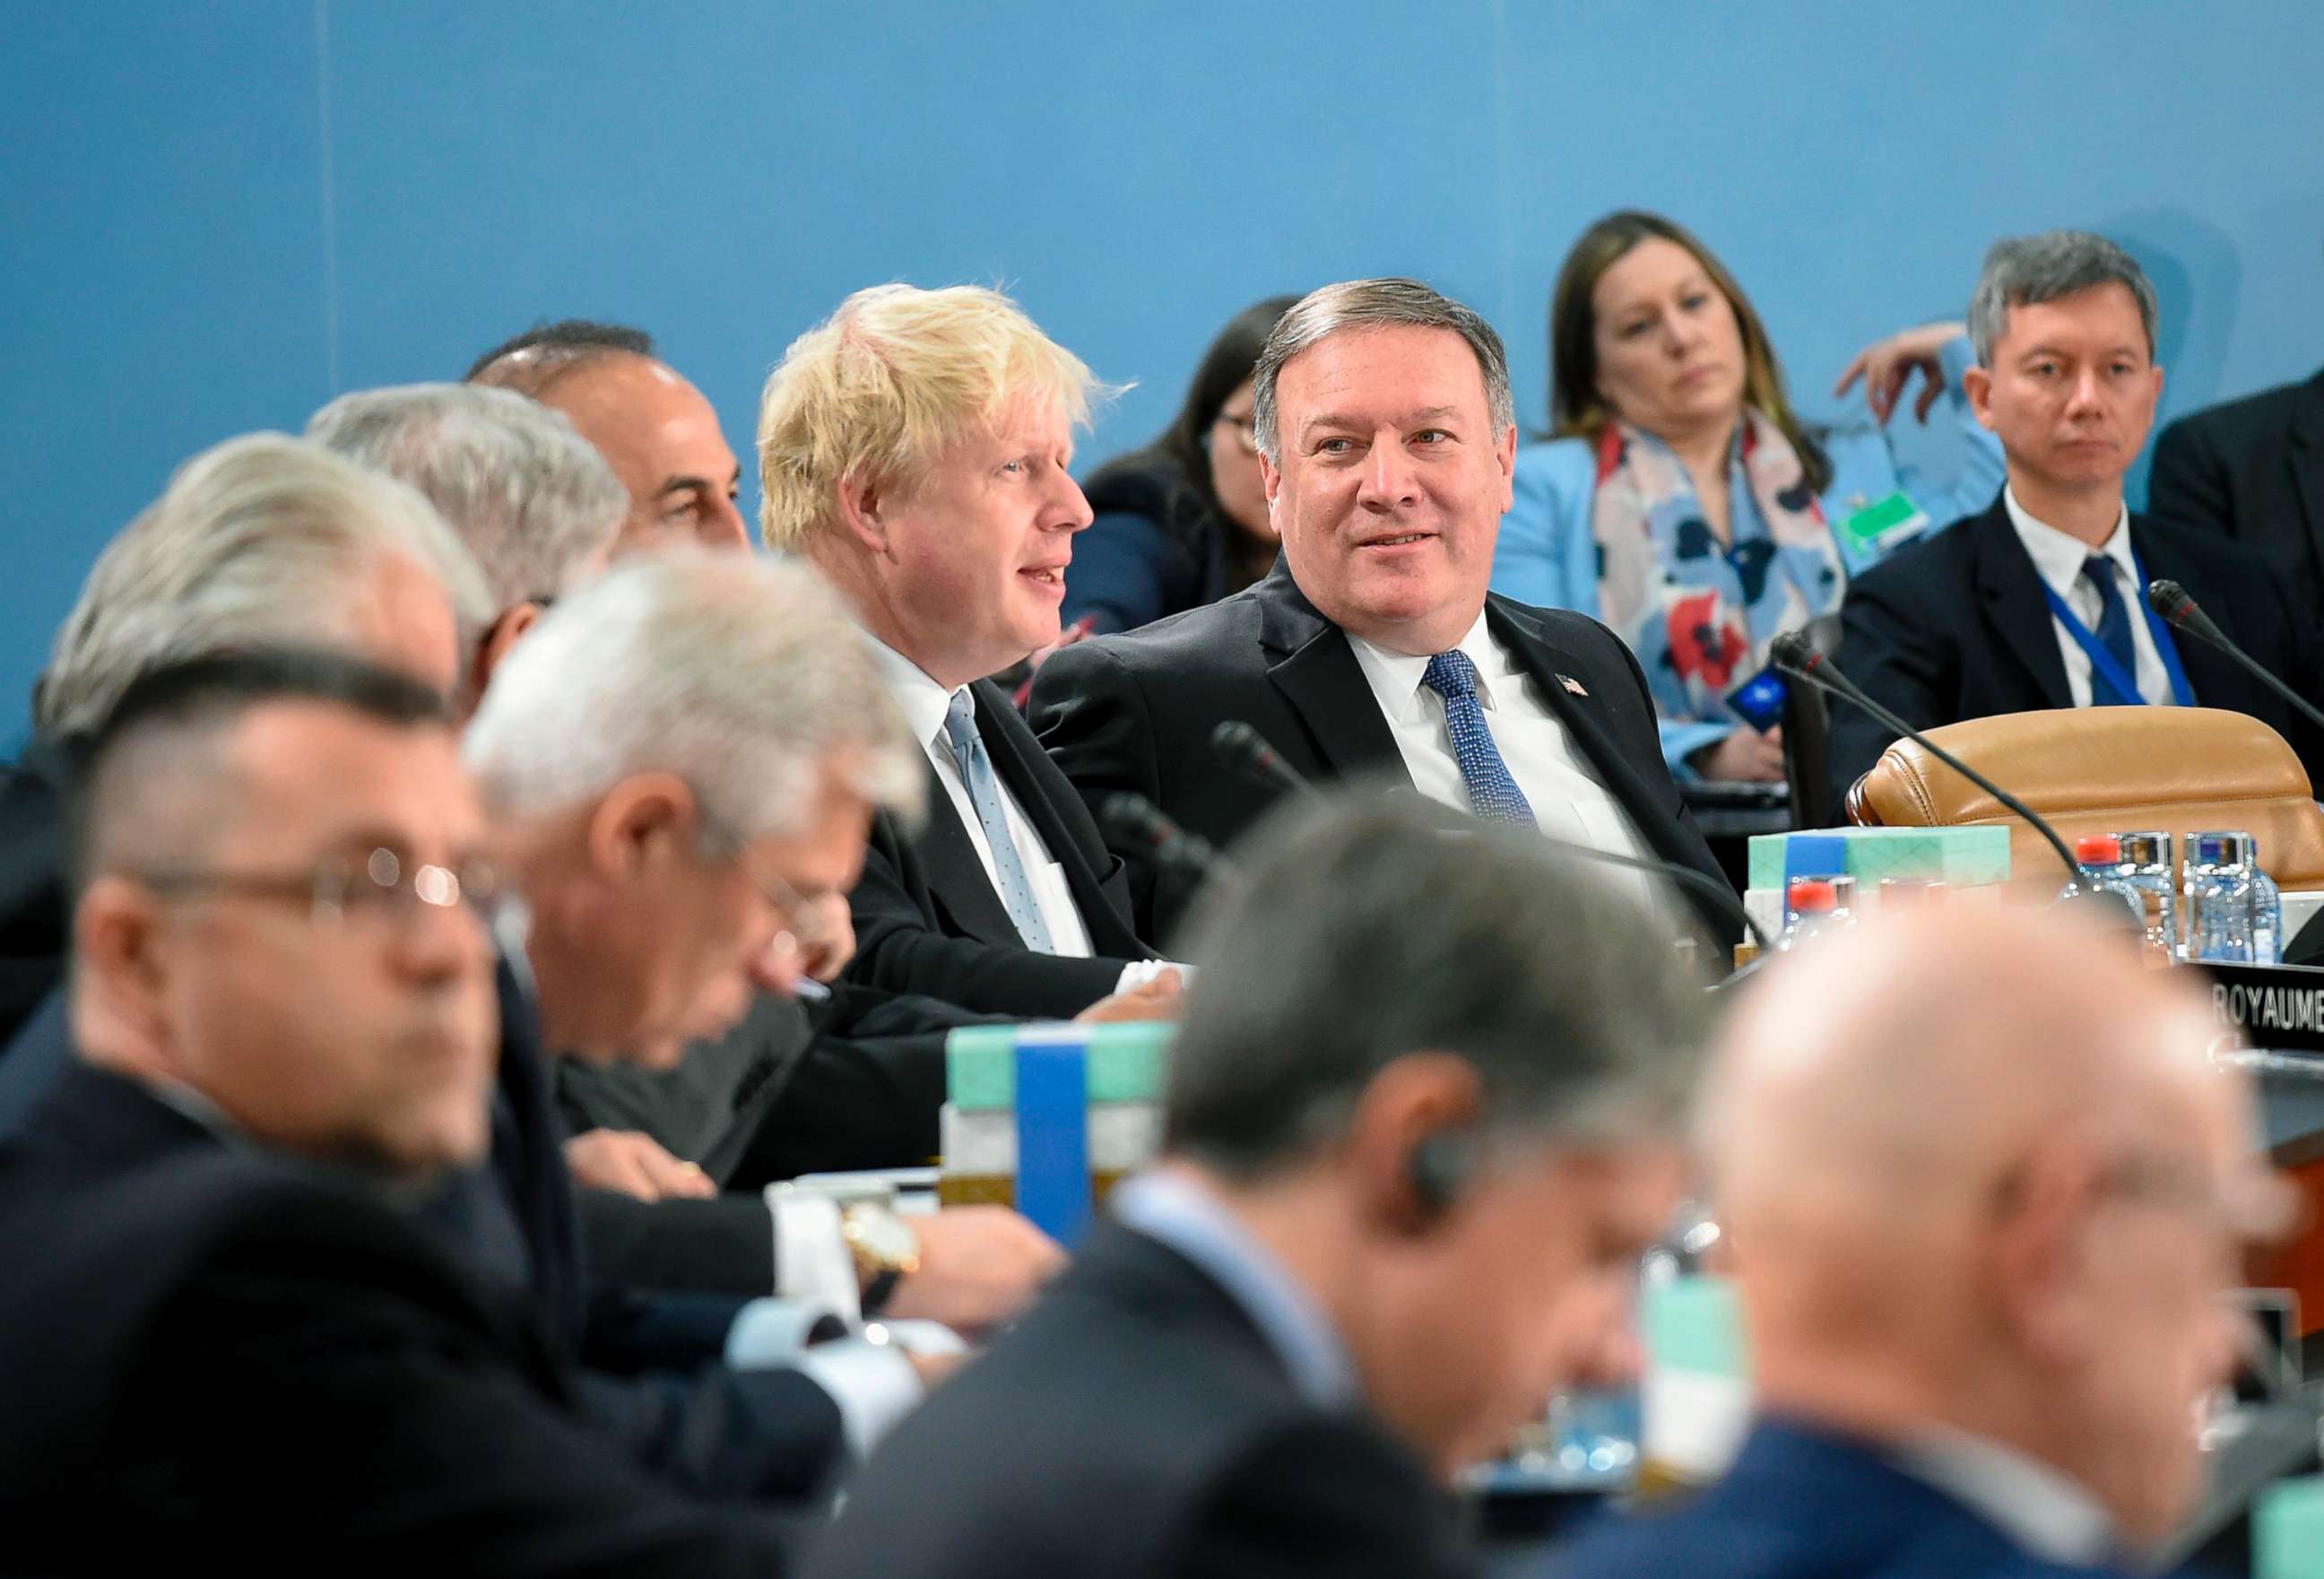 PHOTO: British Foreign Secretary Boris Johnson, left, talks with U.S. Secretary of State Mike Pompeo, right, during a NATO Foreign ministers' meeting at the NATO headquarters in Brussels on April 27, 2018.